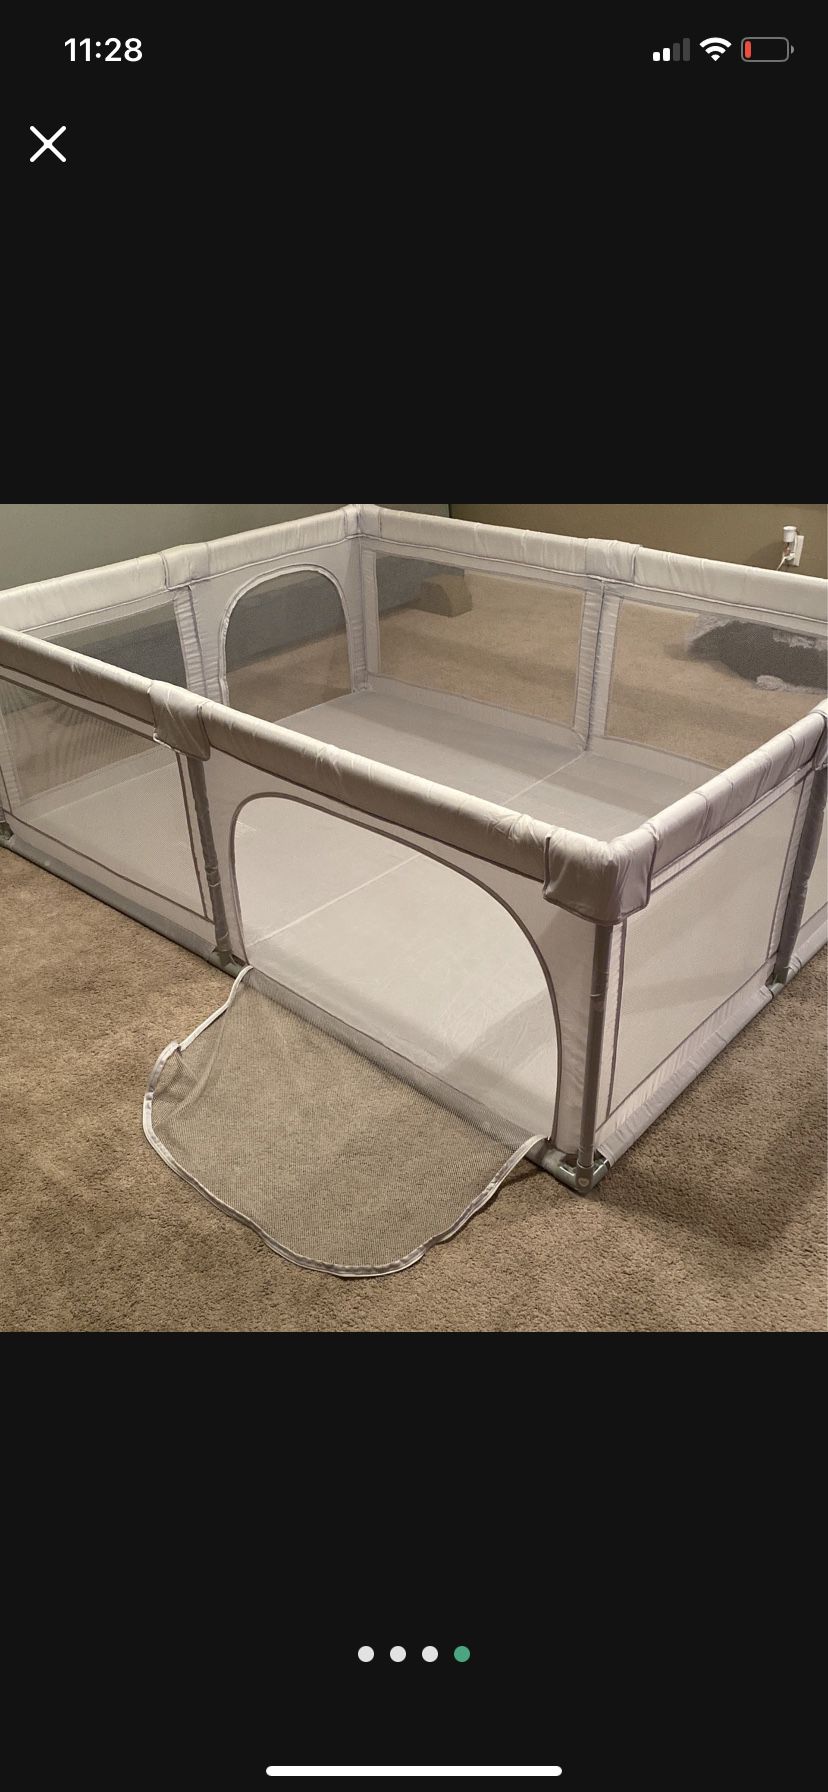 Large Play Pen